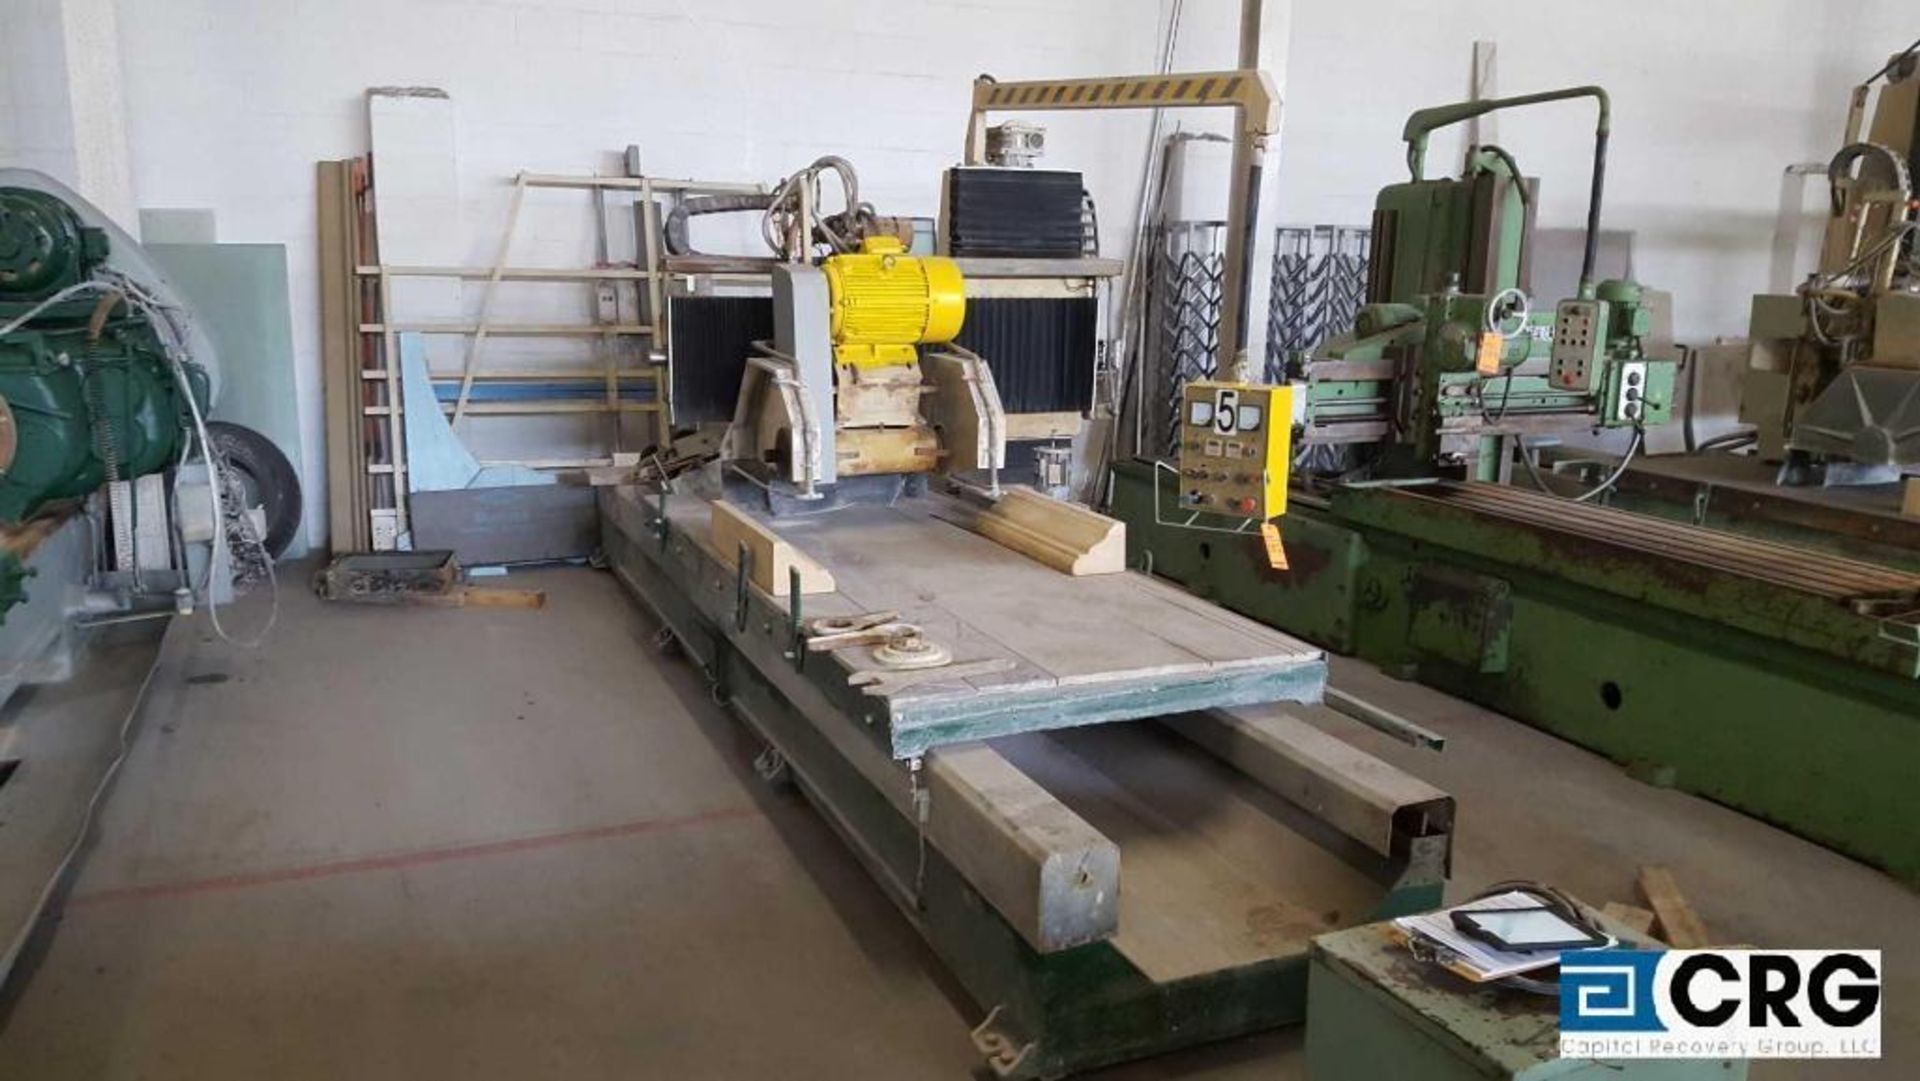 2009 Sheng A twin spindle, stone profiling machine, with template reader, DNFX-1209, 7500 RPM